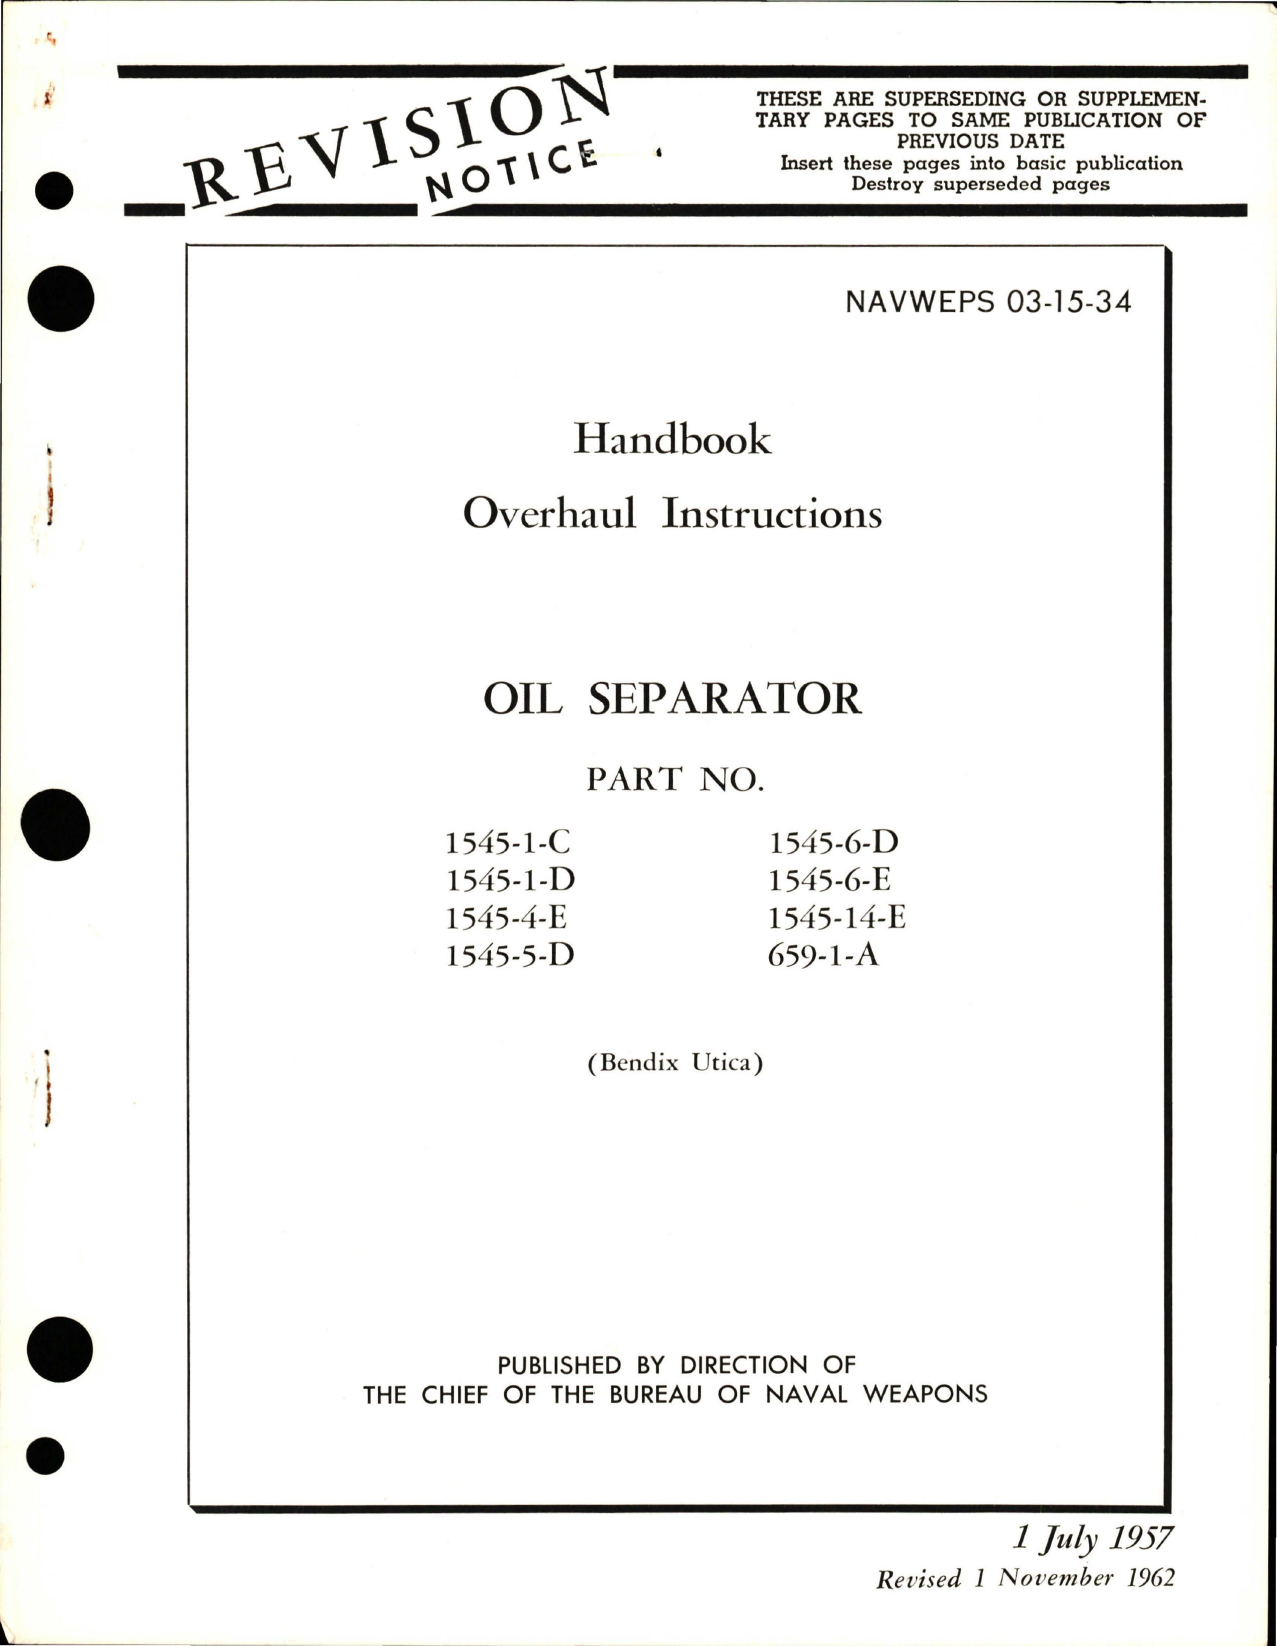 Sample page 1 from AirCorps Library document: Overhaul Instructions for Oil Separator - Parts 1545-1-C, 1545-1-D, 1545-4-E, 1545-5-D, 1545-6-D, 1545-6-E, 1545-14-E, and 659-1-A